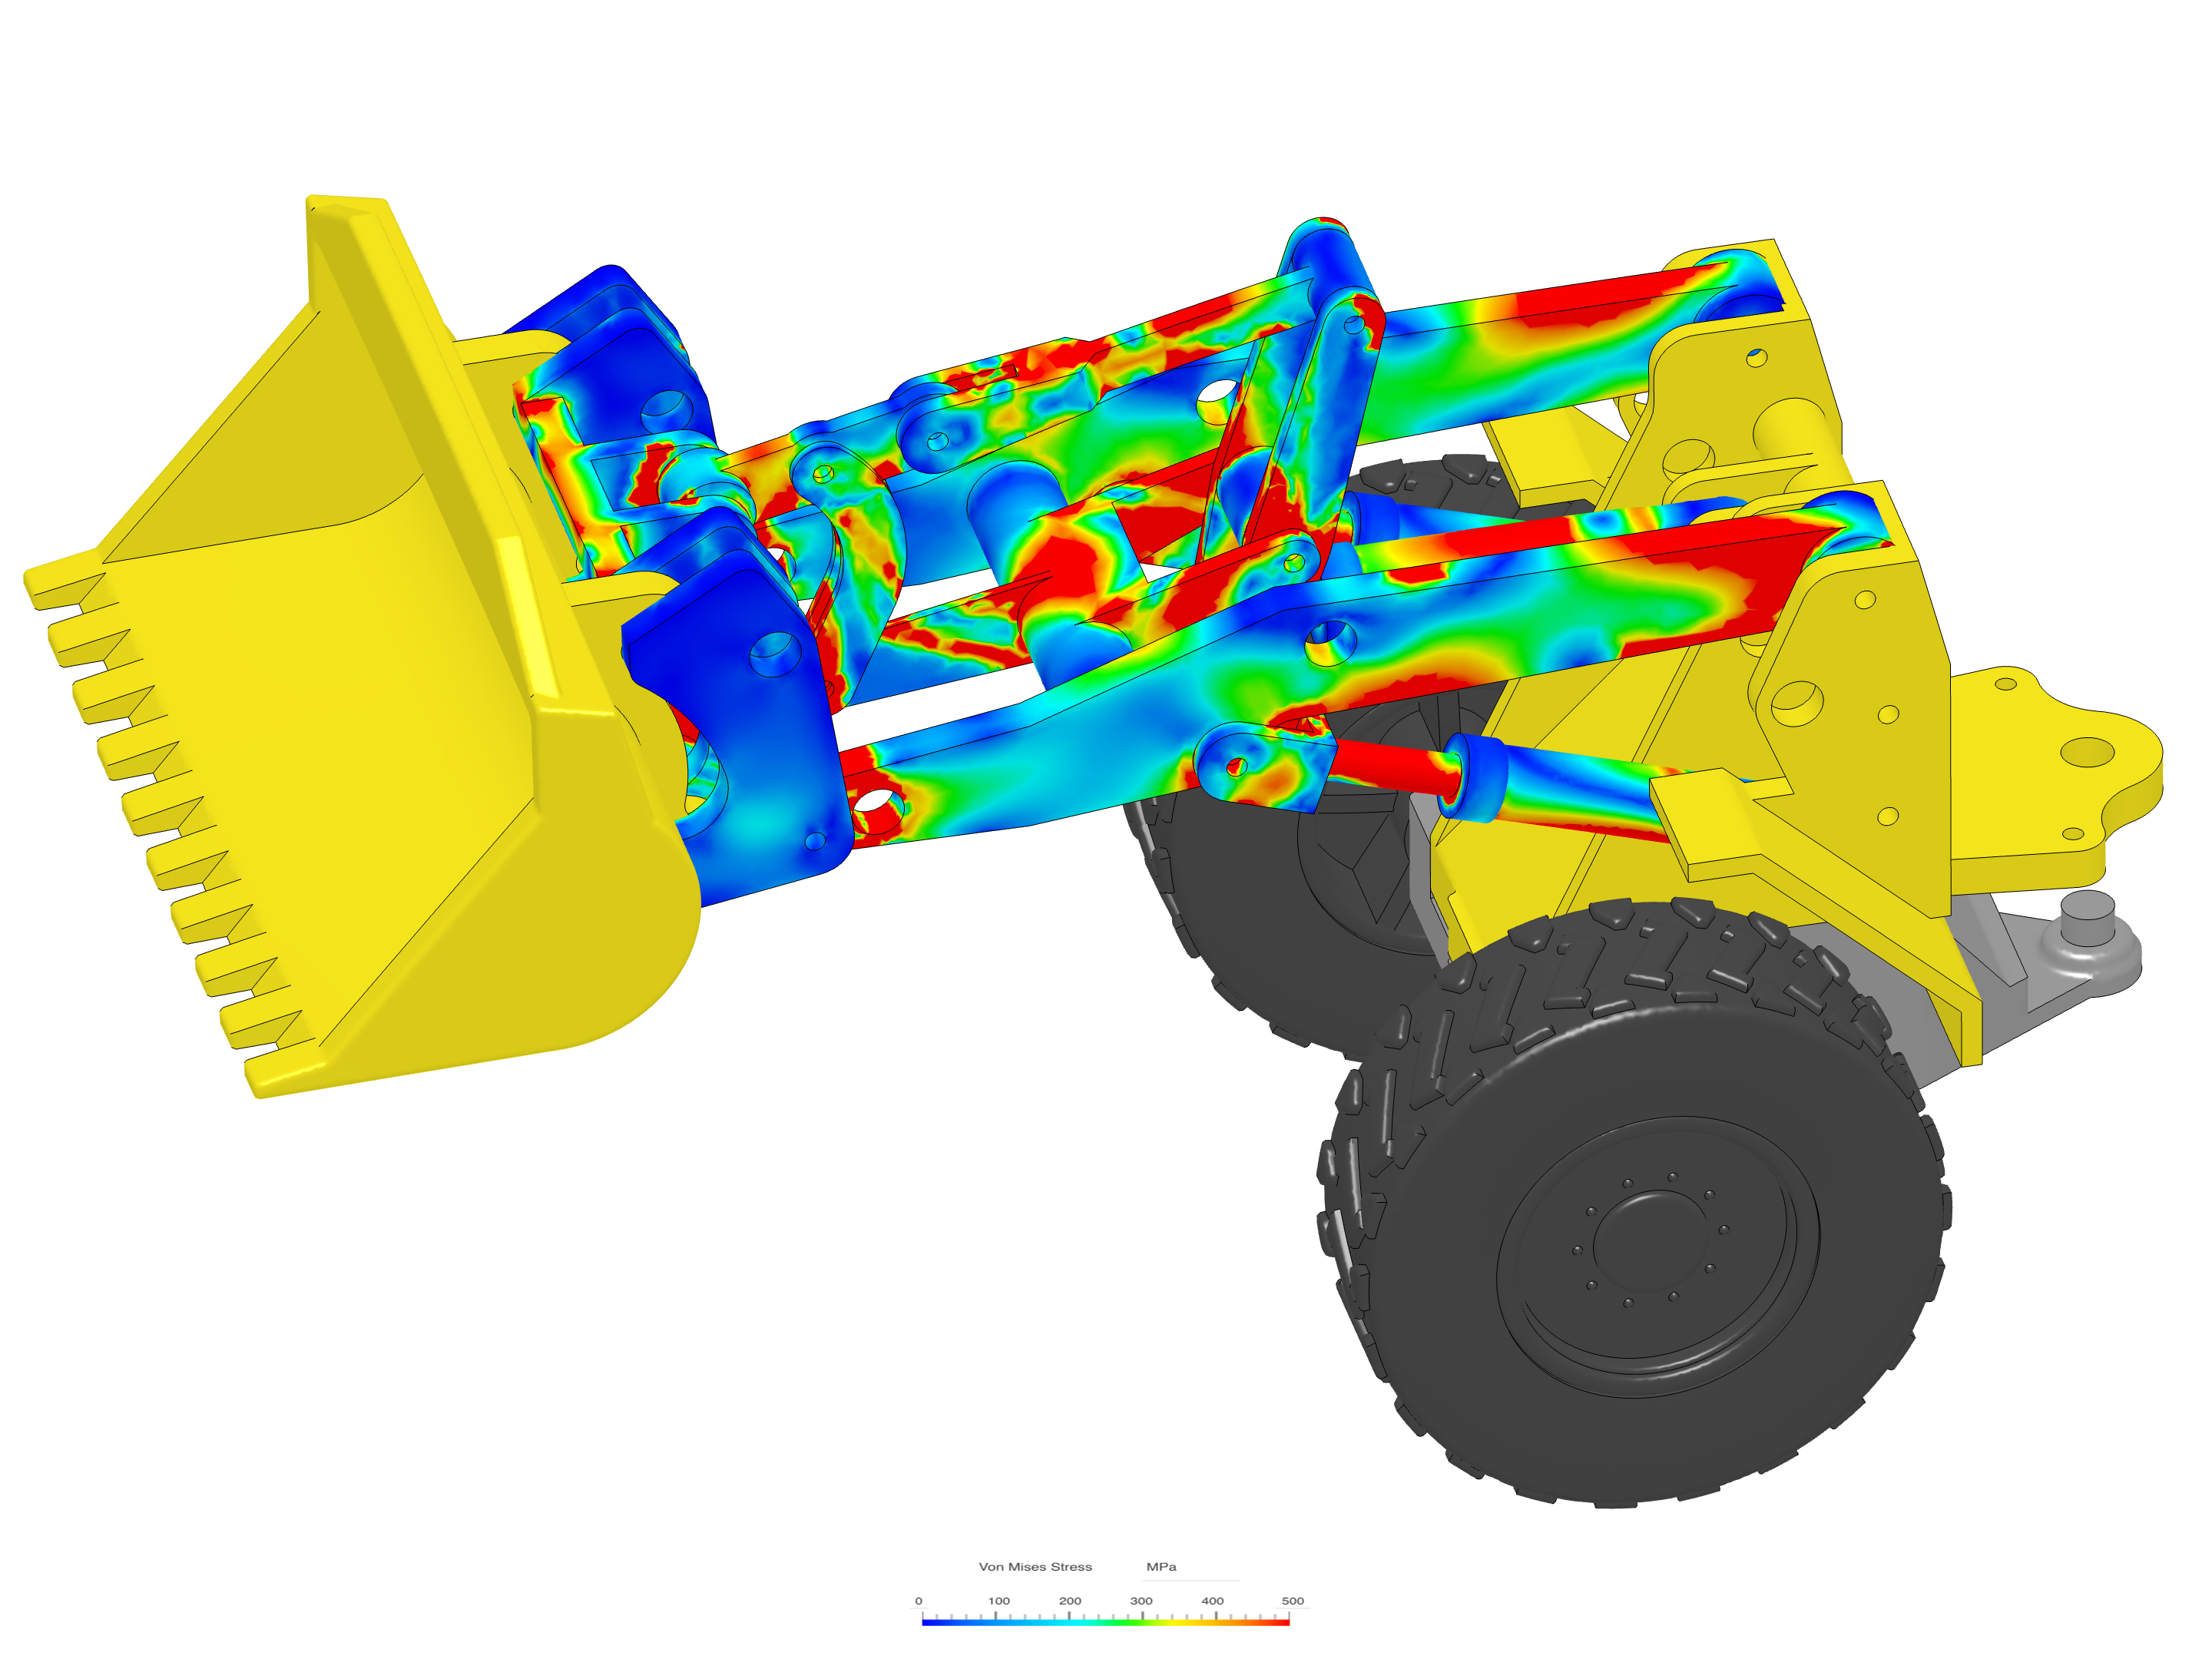 Static Structural Analysis of a Wheel Loader Arm image